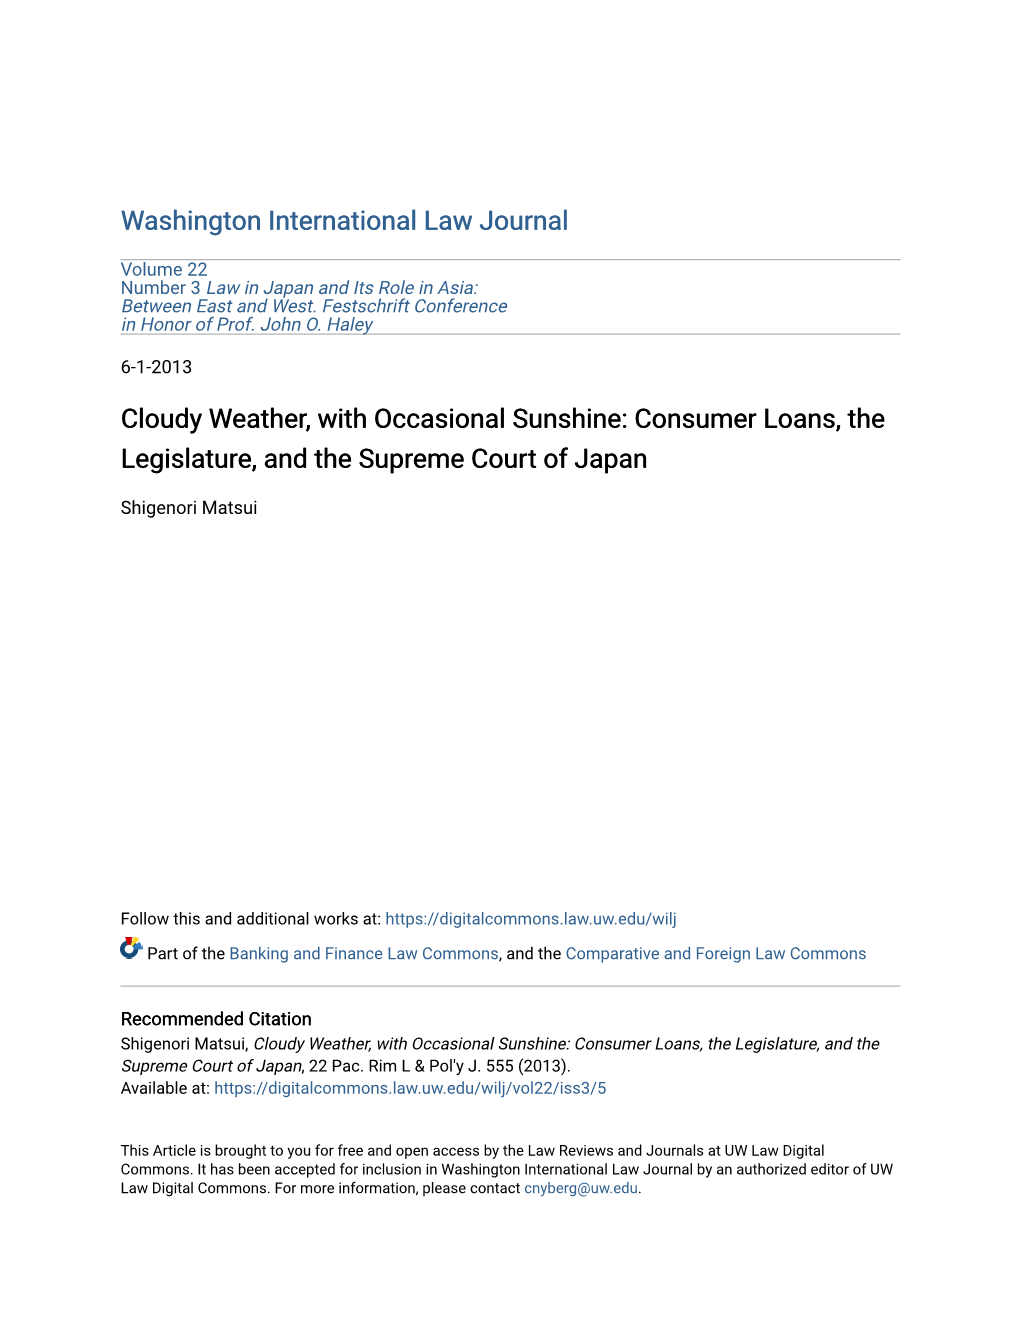 Consumer Loans, the Legislature, and the Supreme Court of Japan